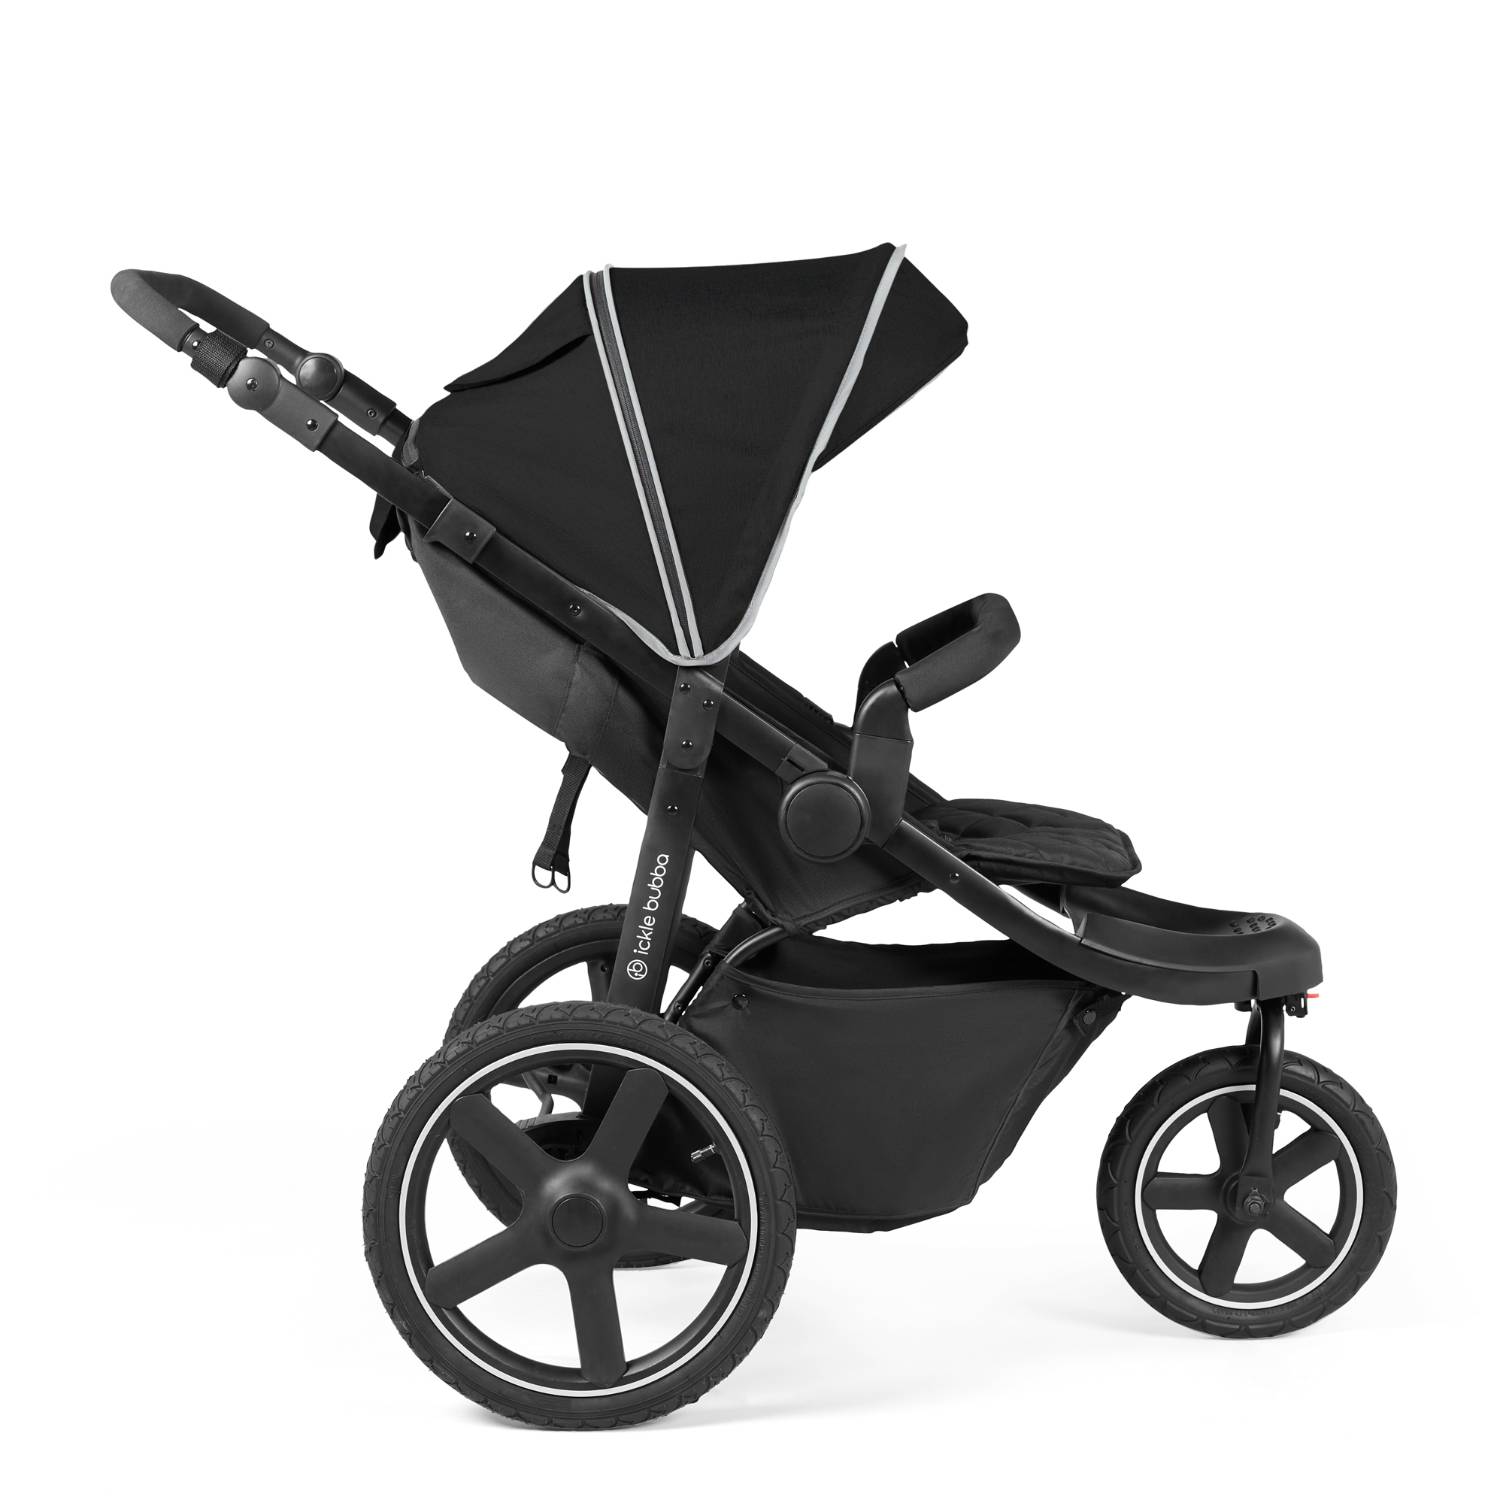 Side view of Ickle Bubba Venus Max Jogger Stroller in Black colour